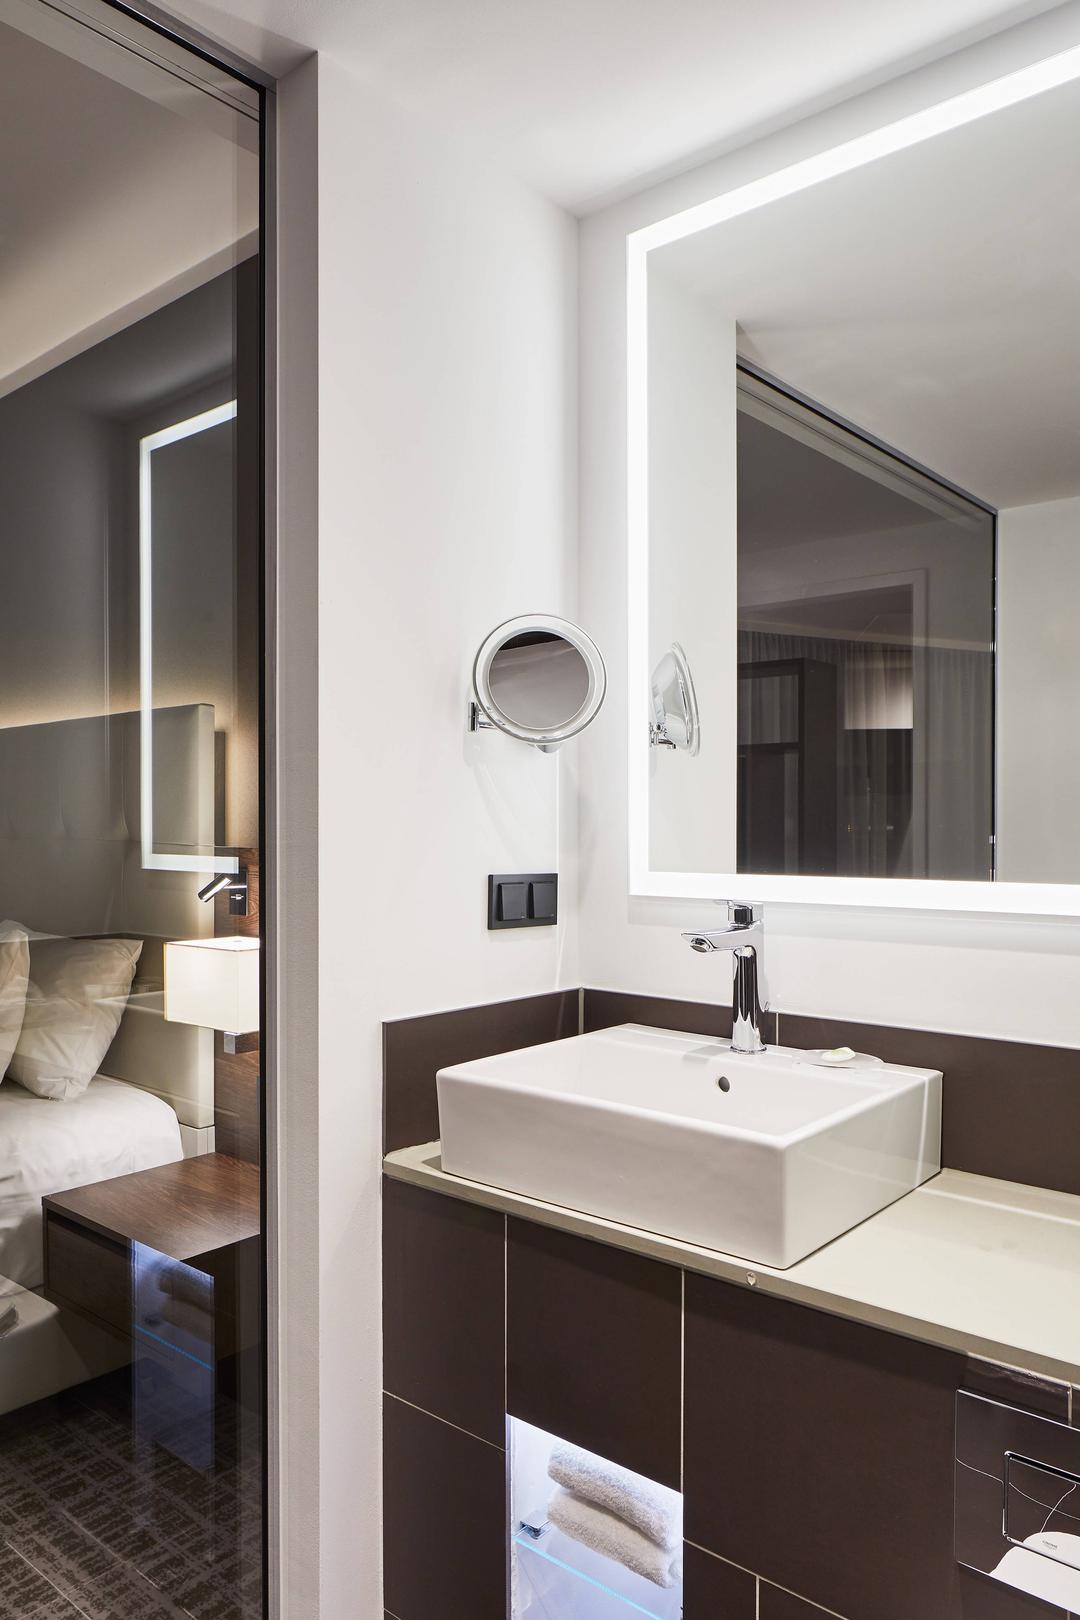 Our bathrooms have all daylight and are equipped with modern facilities.